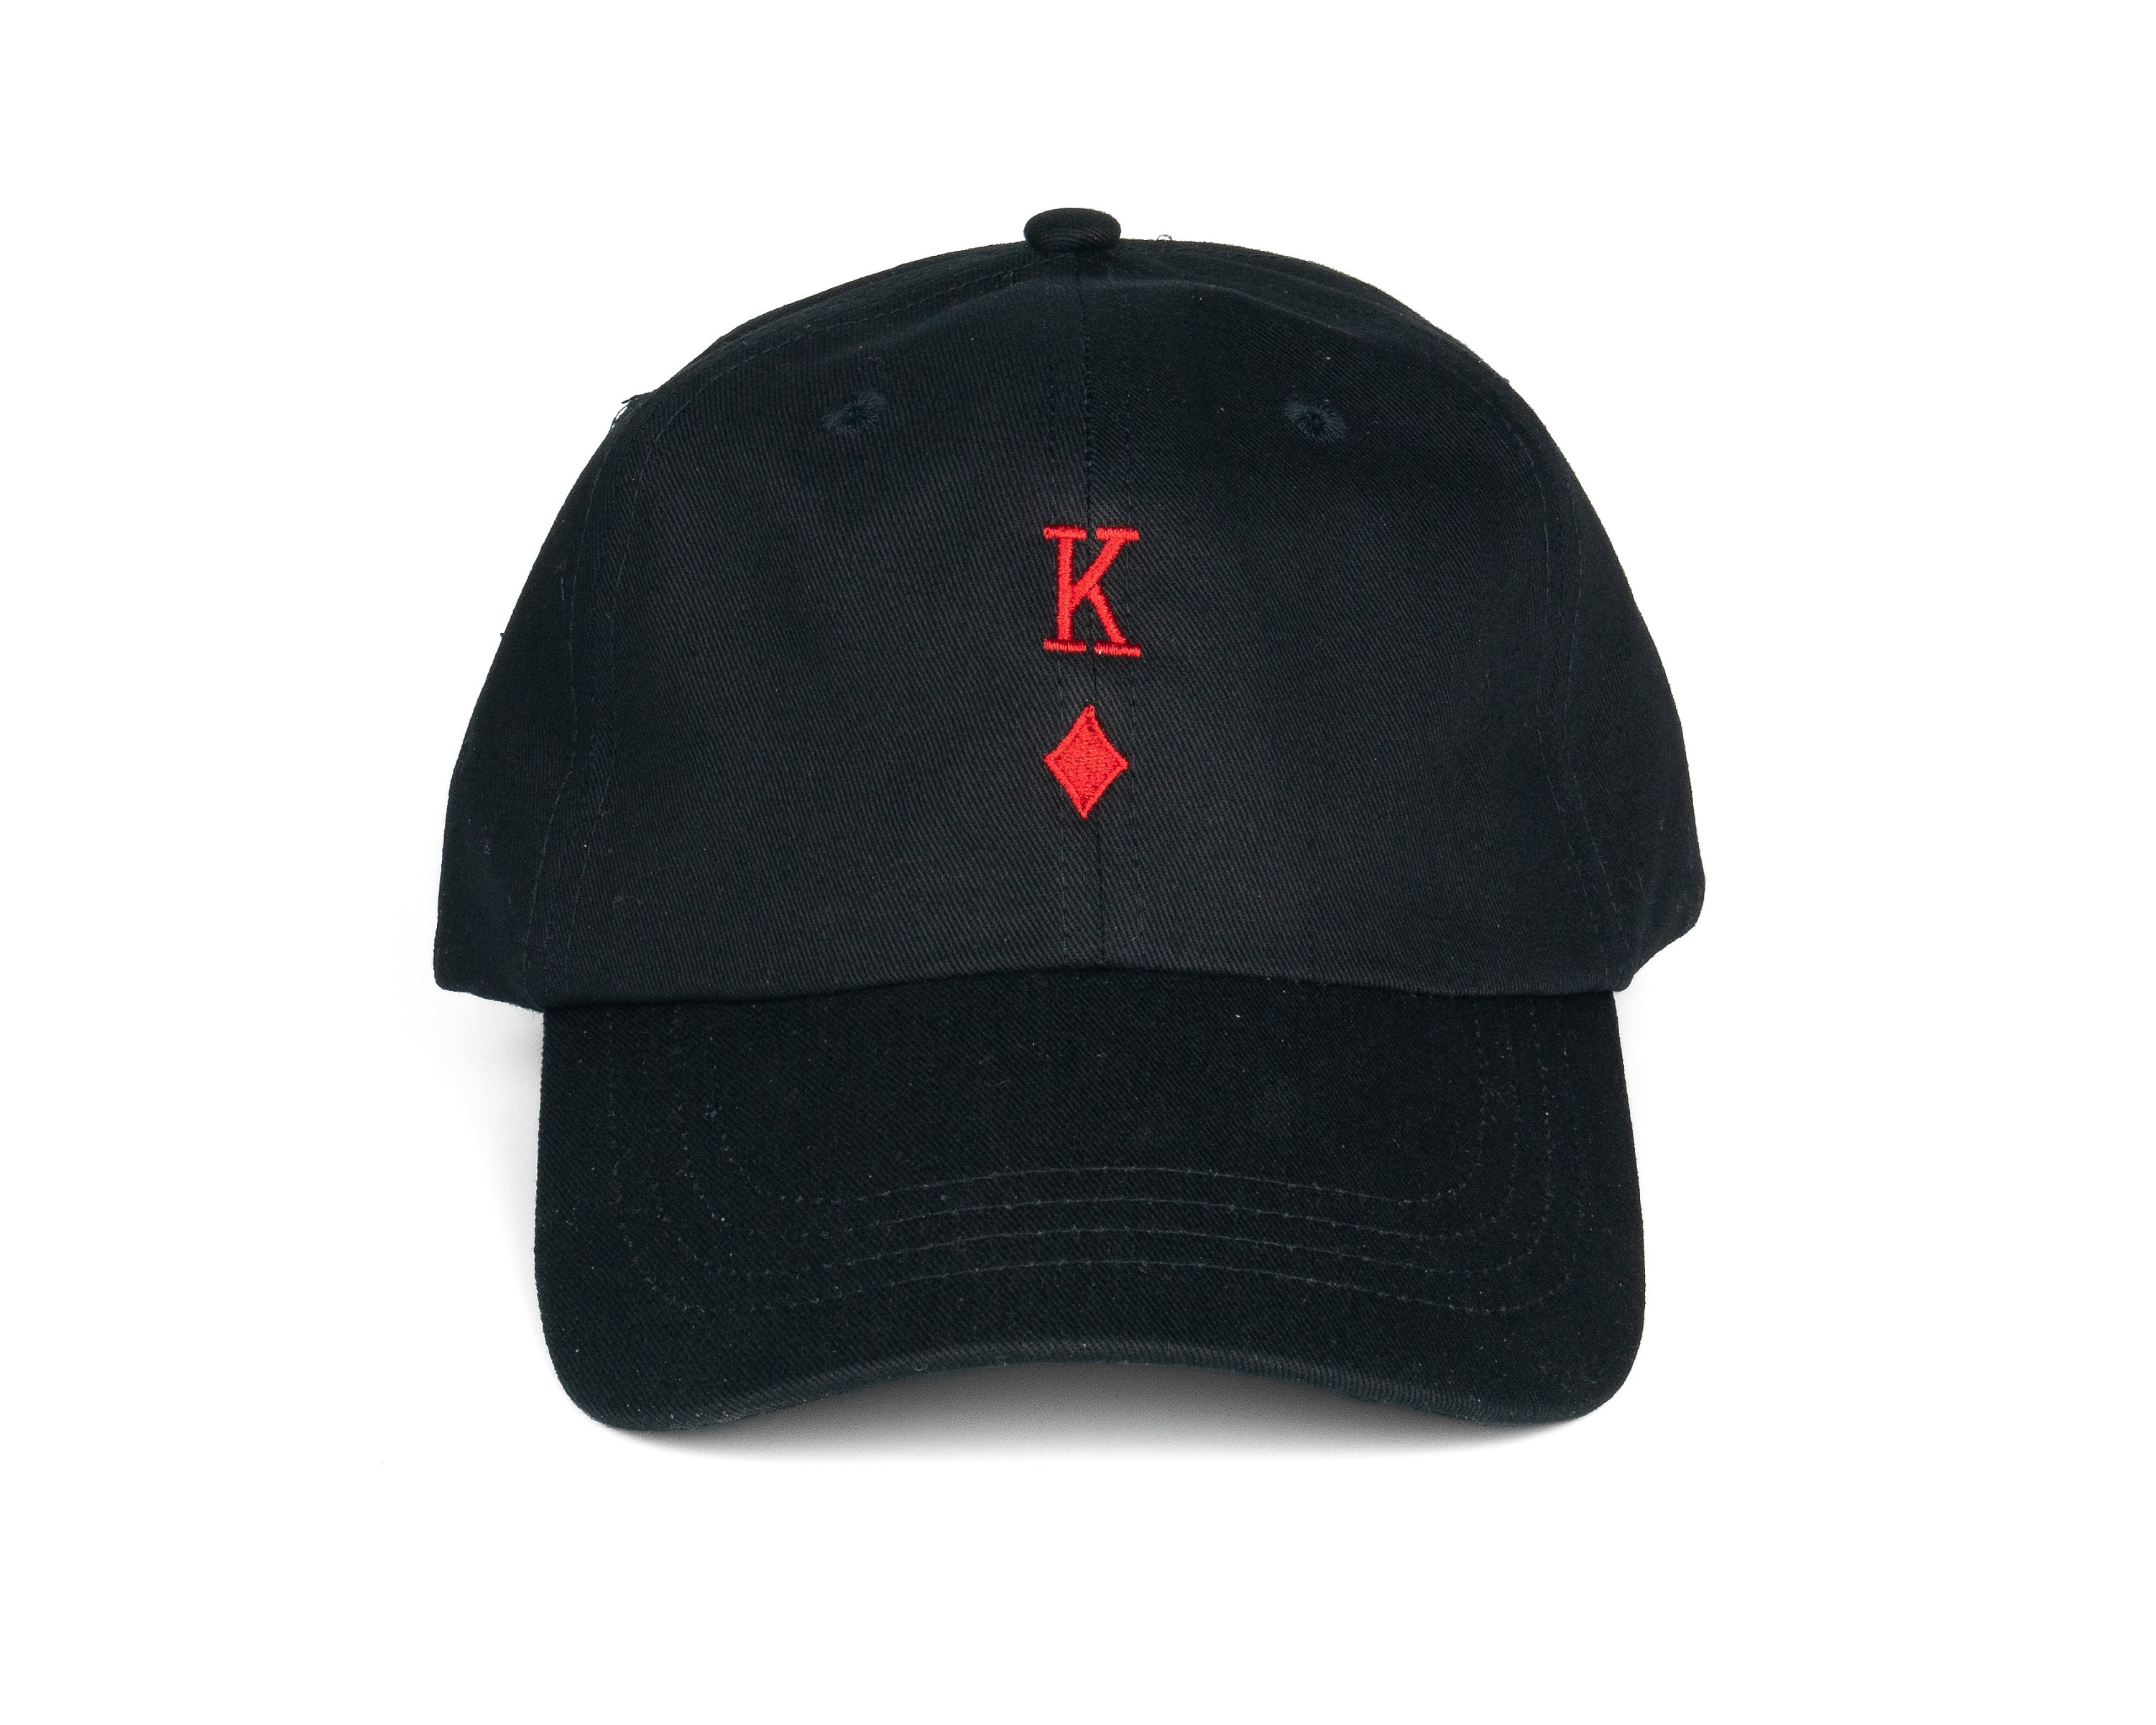 FASHION LOUIS VUITTON CAP HAT WITH BIG LOGO $46.80 with Free shipping